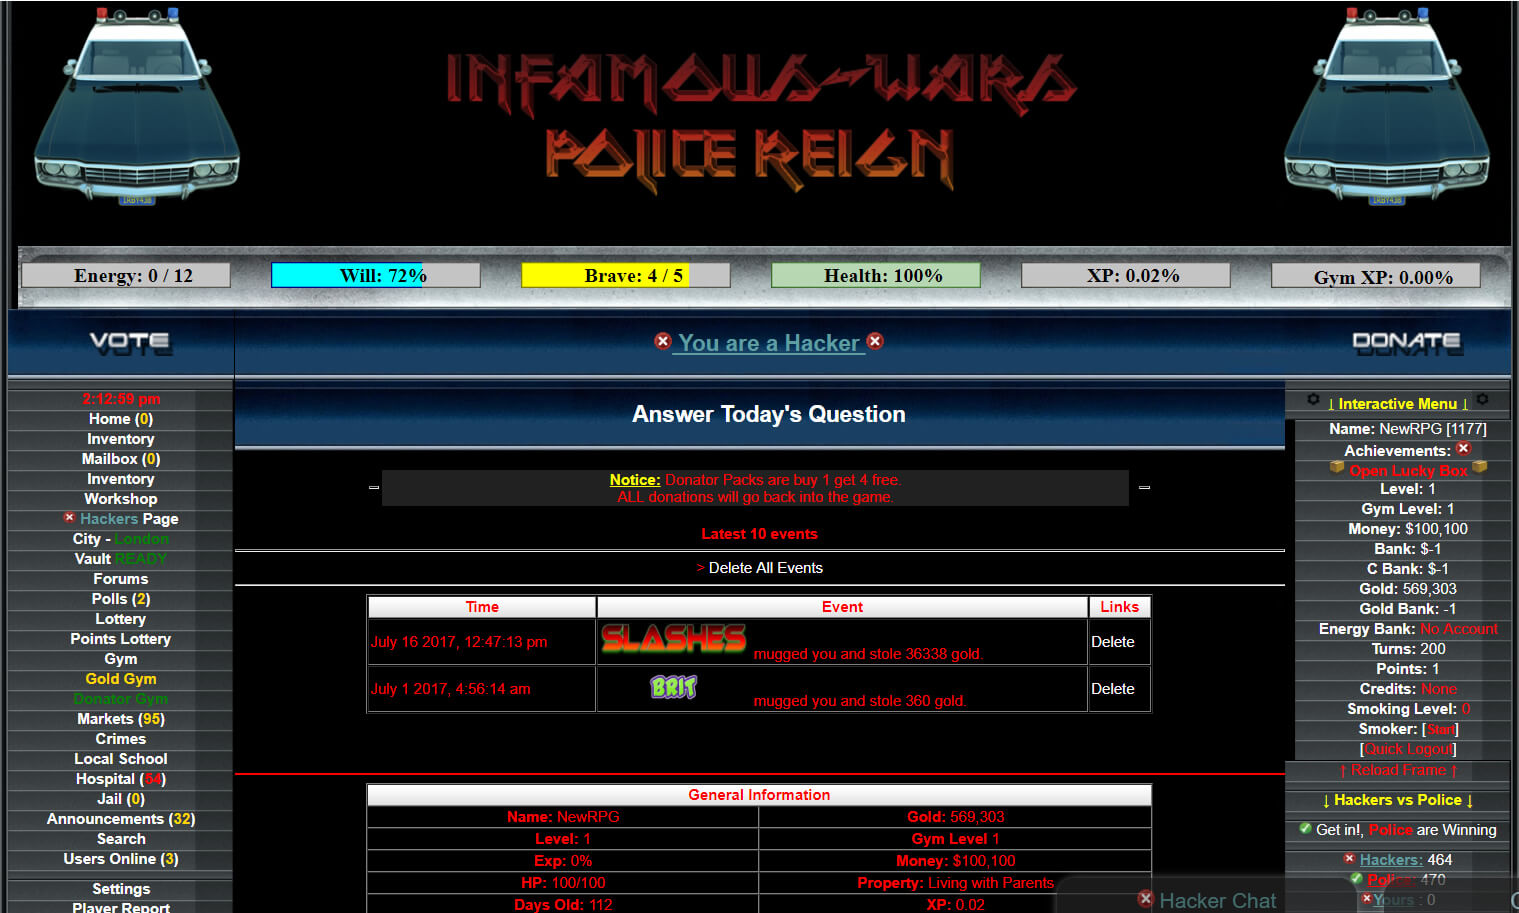 infamous-wars-police